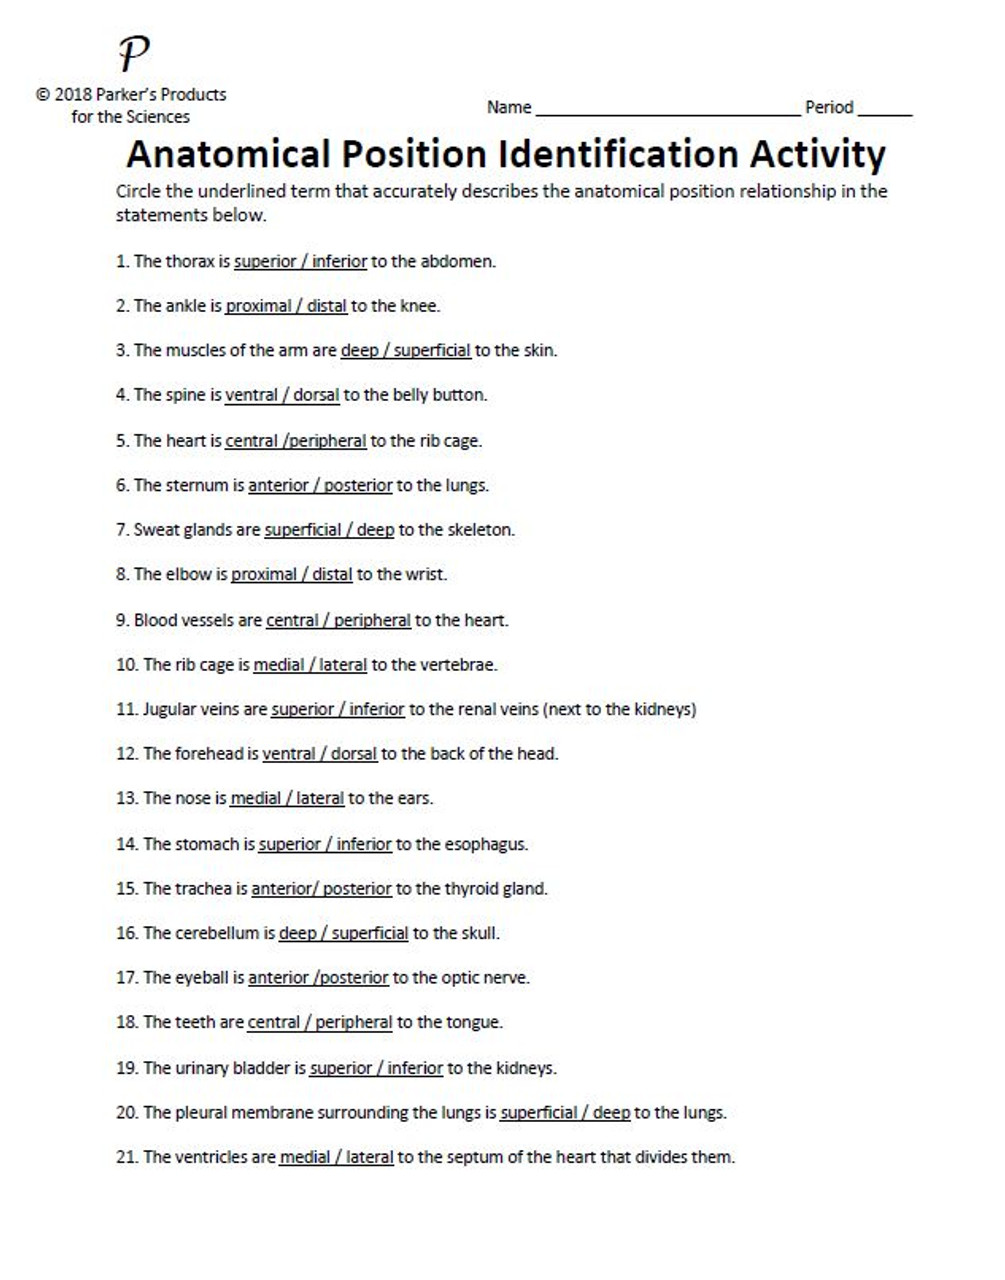 Anatomical Position Term Activity Series